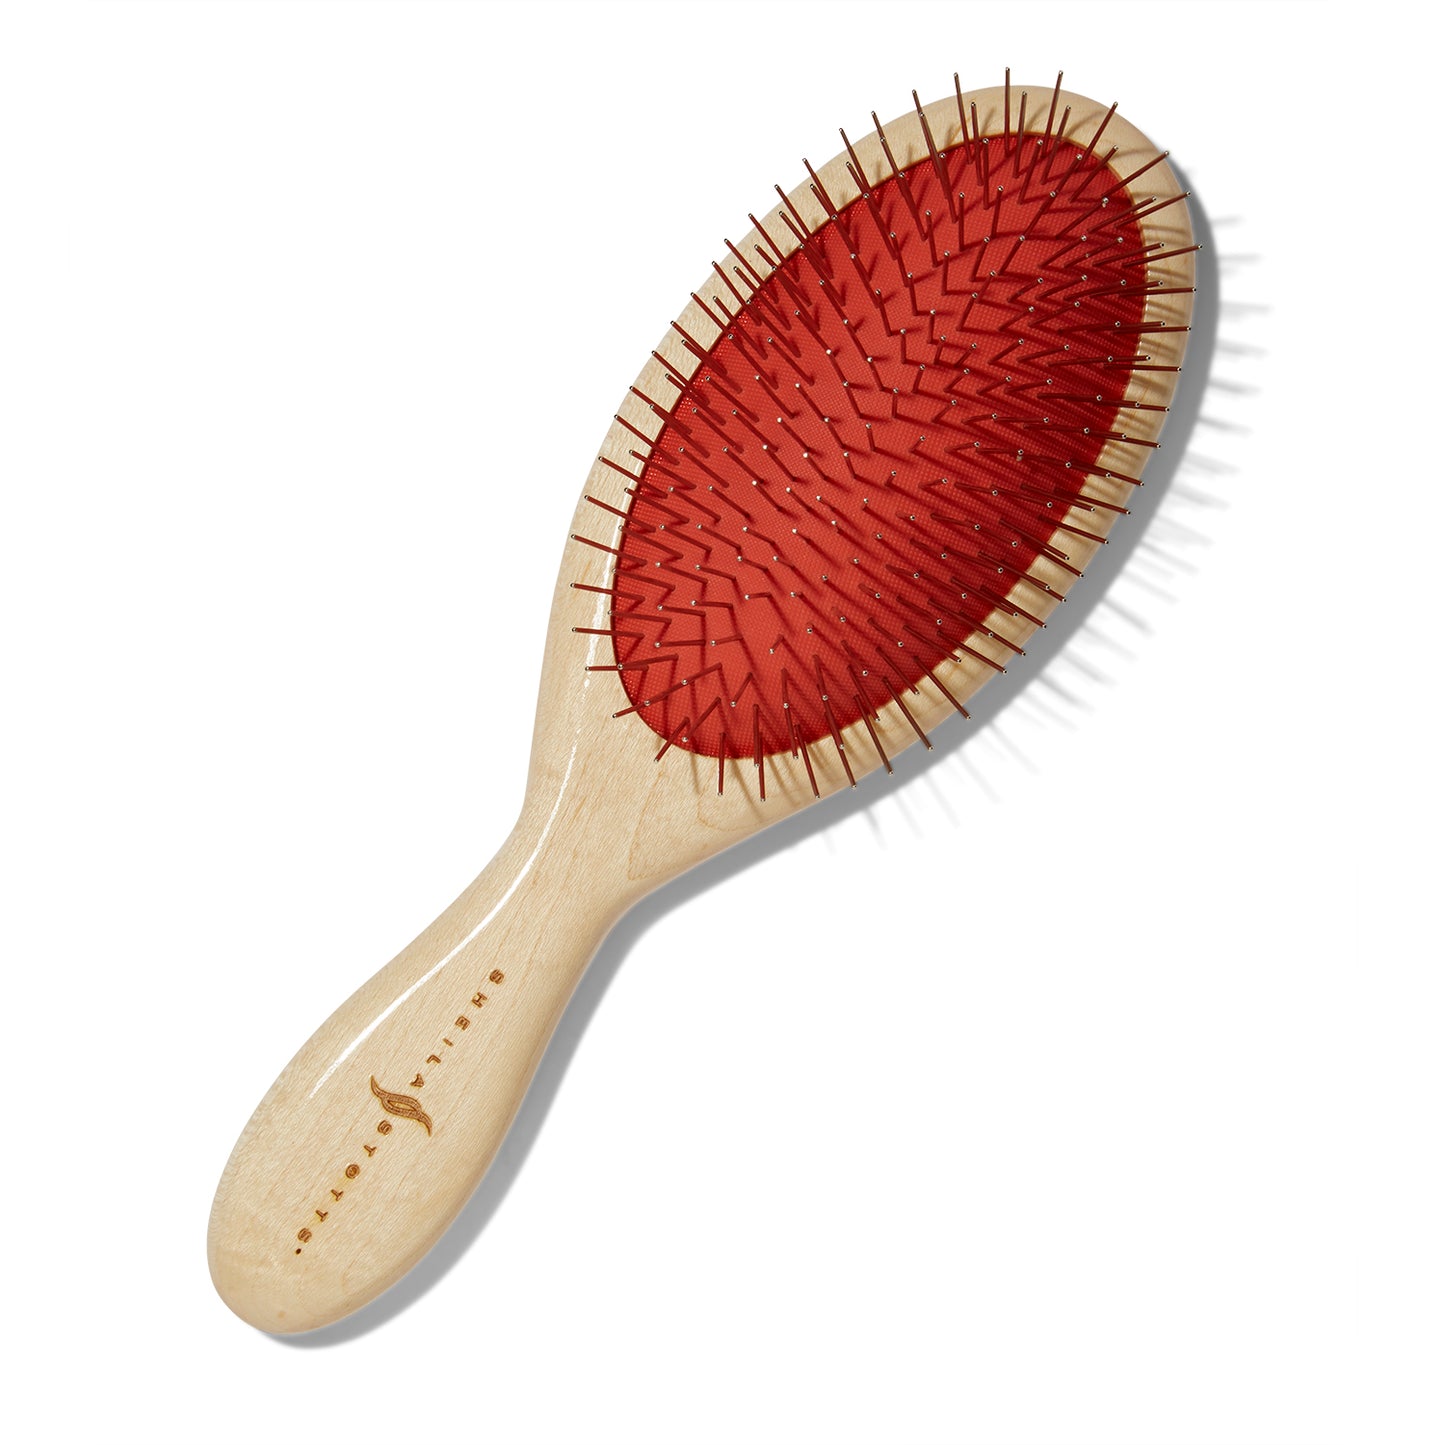 Front view of the Sheila Stotts Full Size Untangle Hair Brush. The handle is a light wood, the tines are silver metal and the rubber the times are embedded in is deep pink.